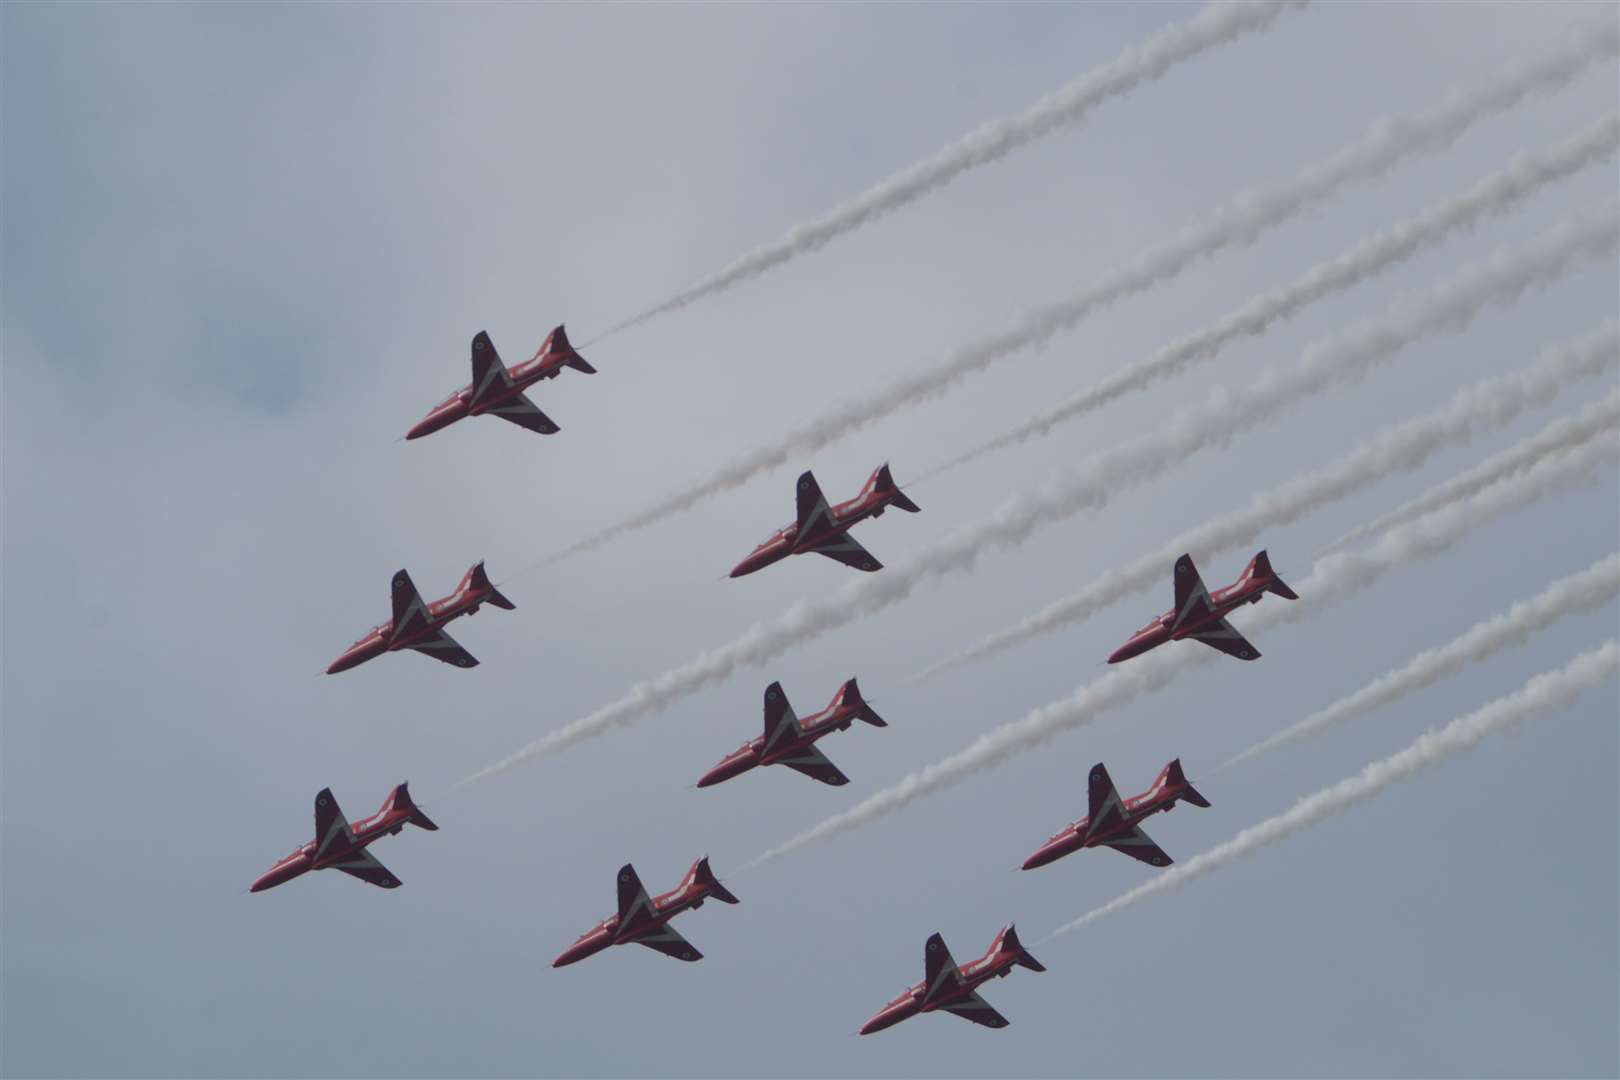 The Red Arrows thrill the crowds at the Herne Bay airshow on Saturday. Picture: Chris Davey FM4891436 (4493935)